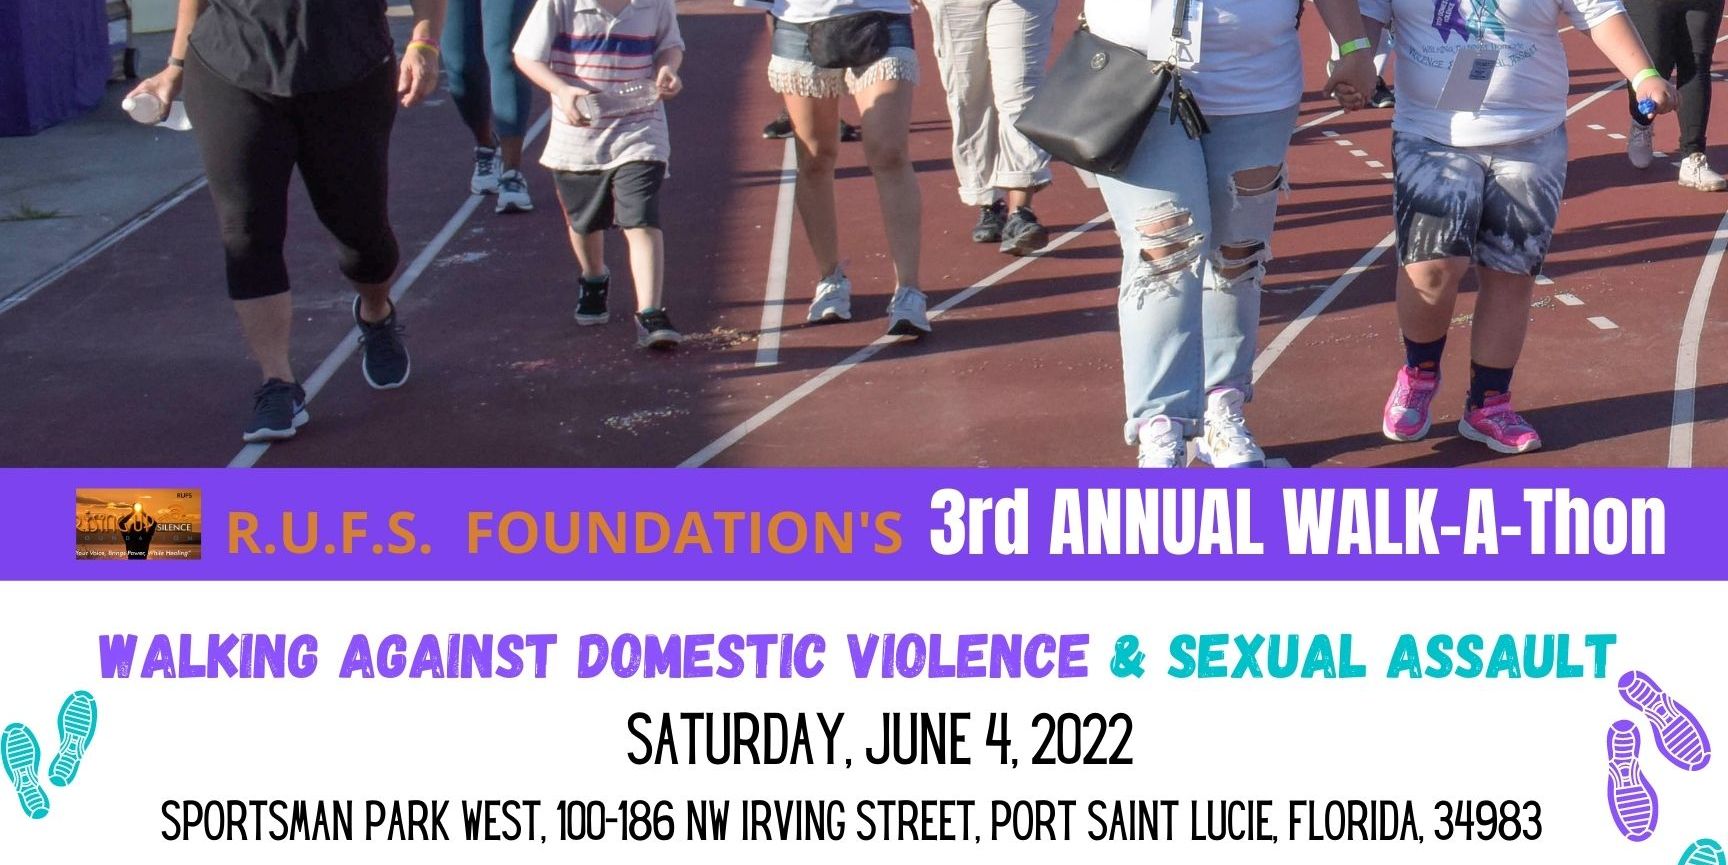 RUFS Foundation 3rd. Annual Walk Against Domestic Violence & Sexual Assault promotional image